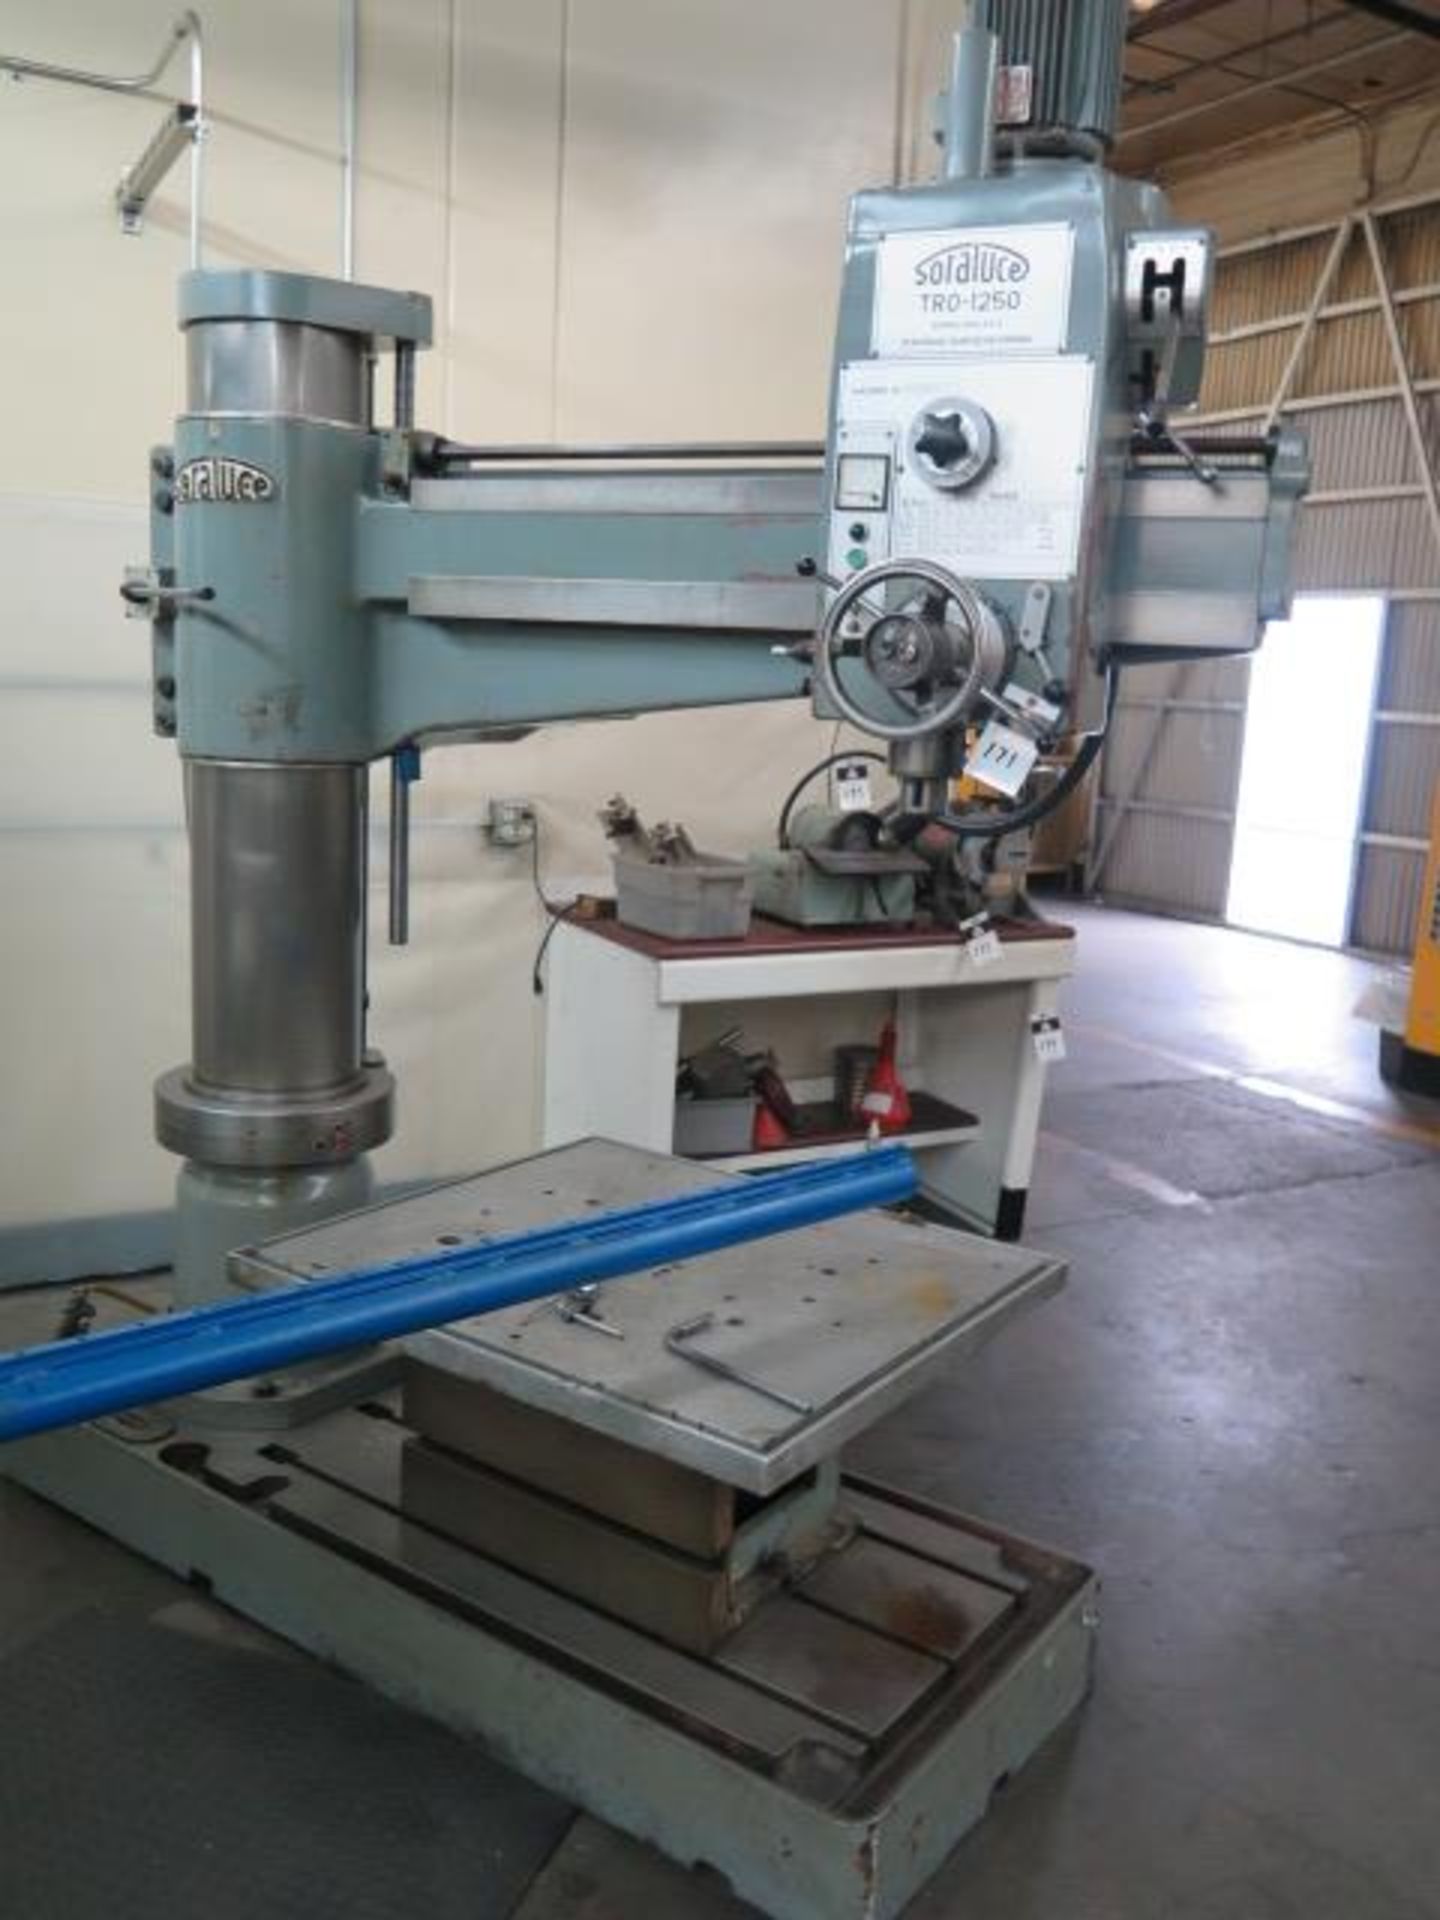 Soraluce TR0-1250 11” Column x 36” Radial Arm Drill s/n 3208-10208 w/ 29-1700 RPM, SOLD AS IS - Image 2 of 10